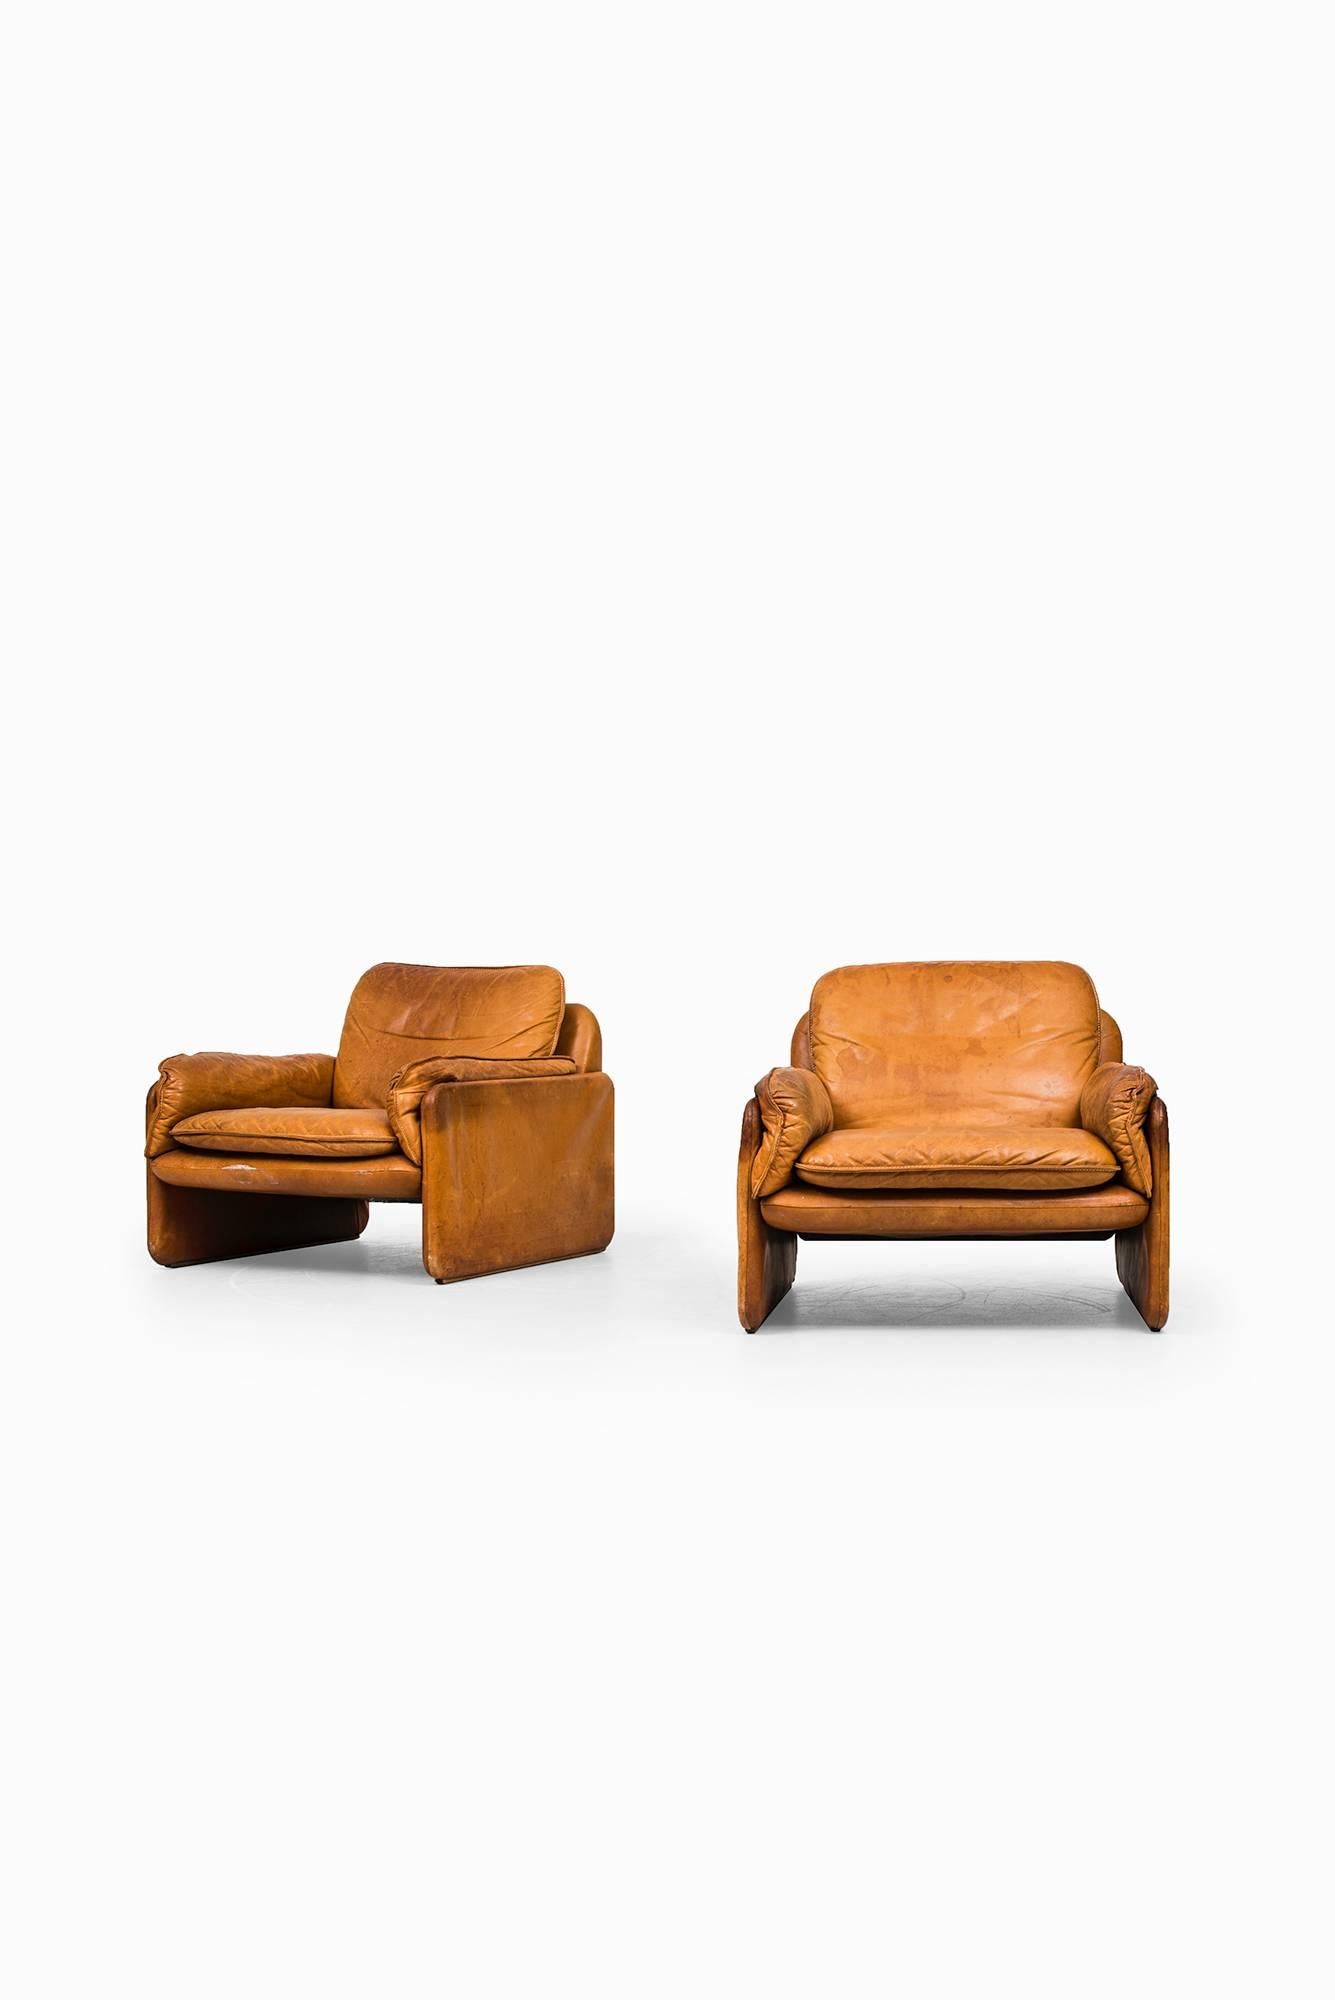 Mid-Century Modern Easy Chairs in Cognac Brown Leather by De Sede in Switzerland